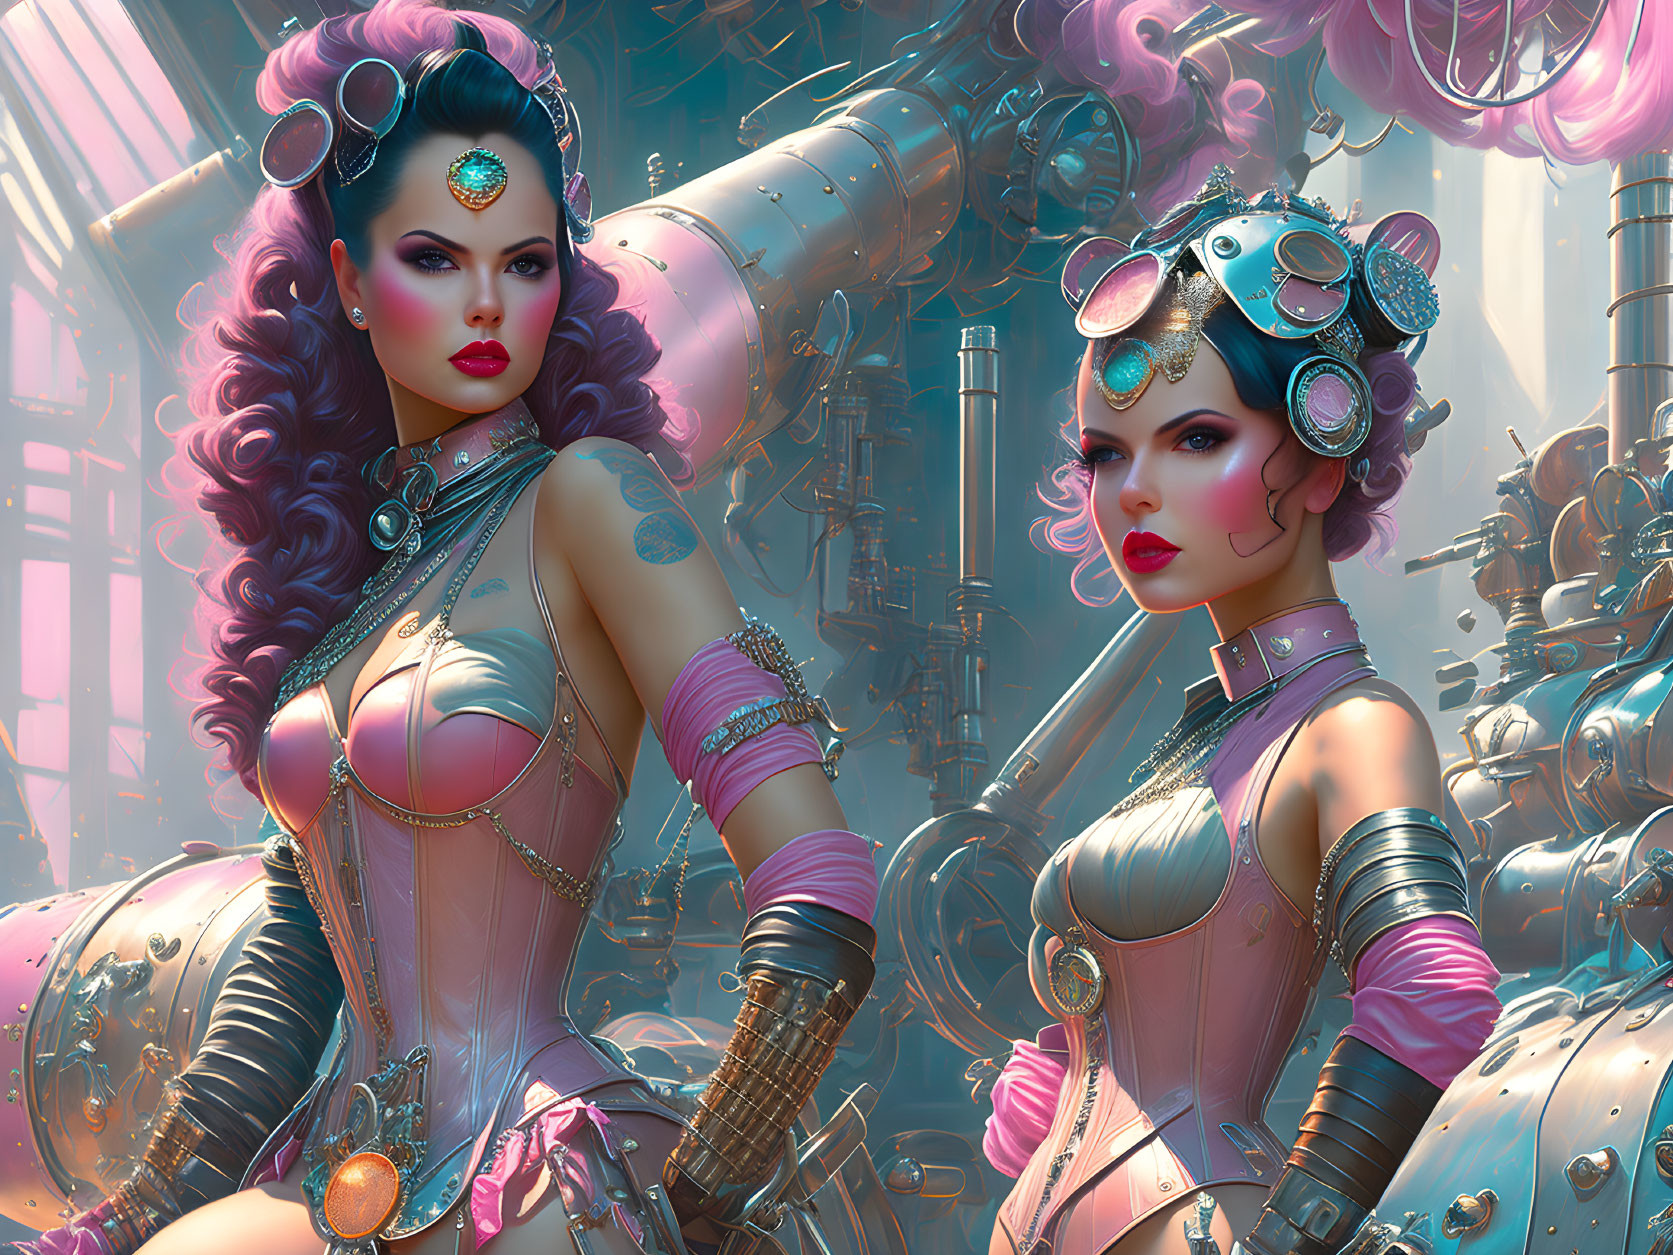 Two women in steampunk attire with goggles and vibrant hair against industrial pipes